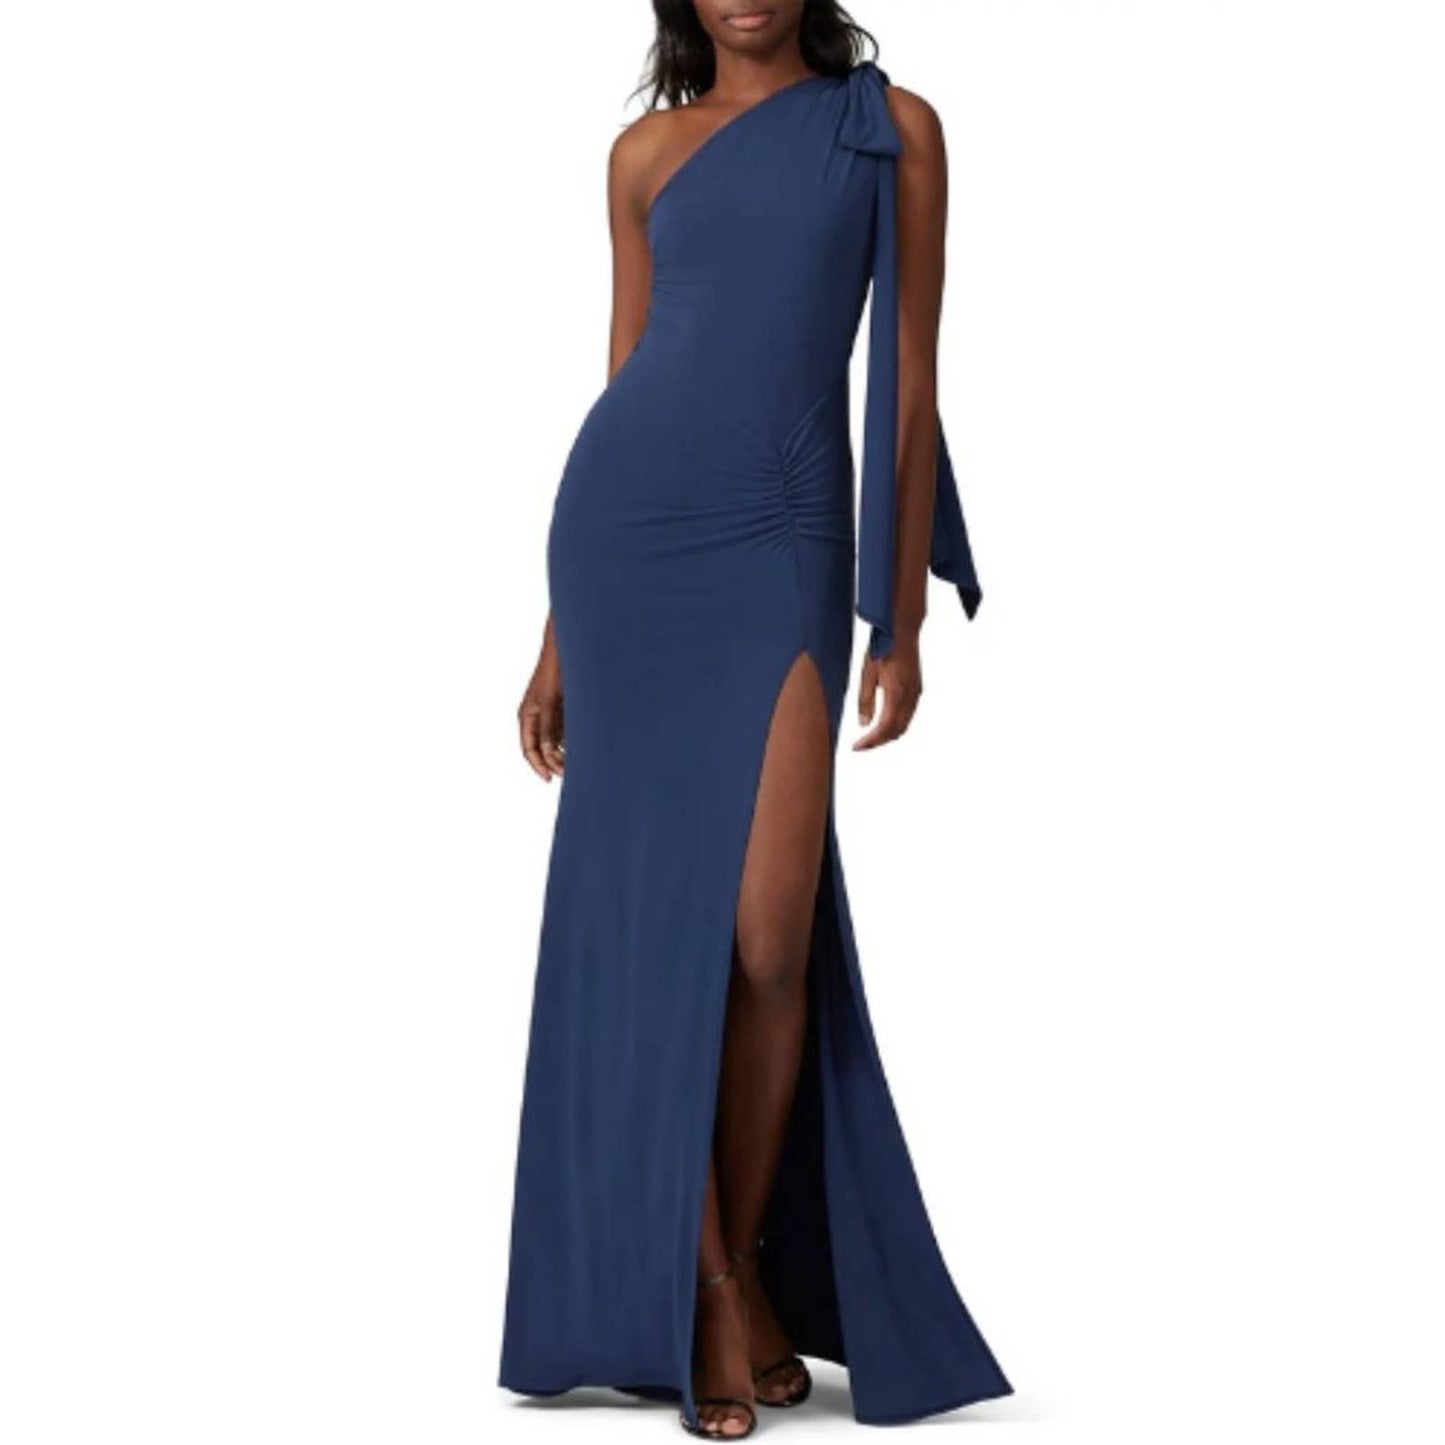 Katie May Attention Seeker Gown in Blue Size Small